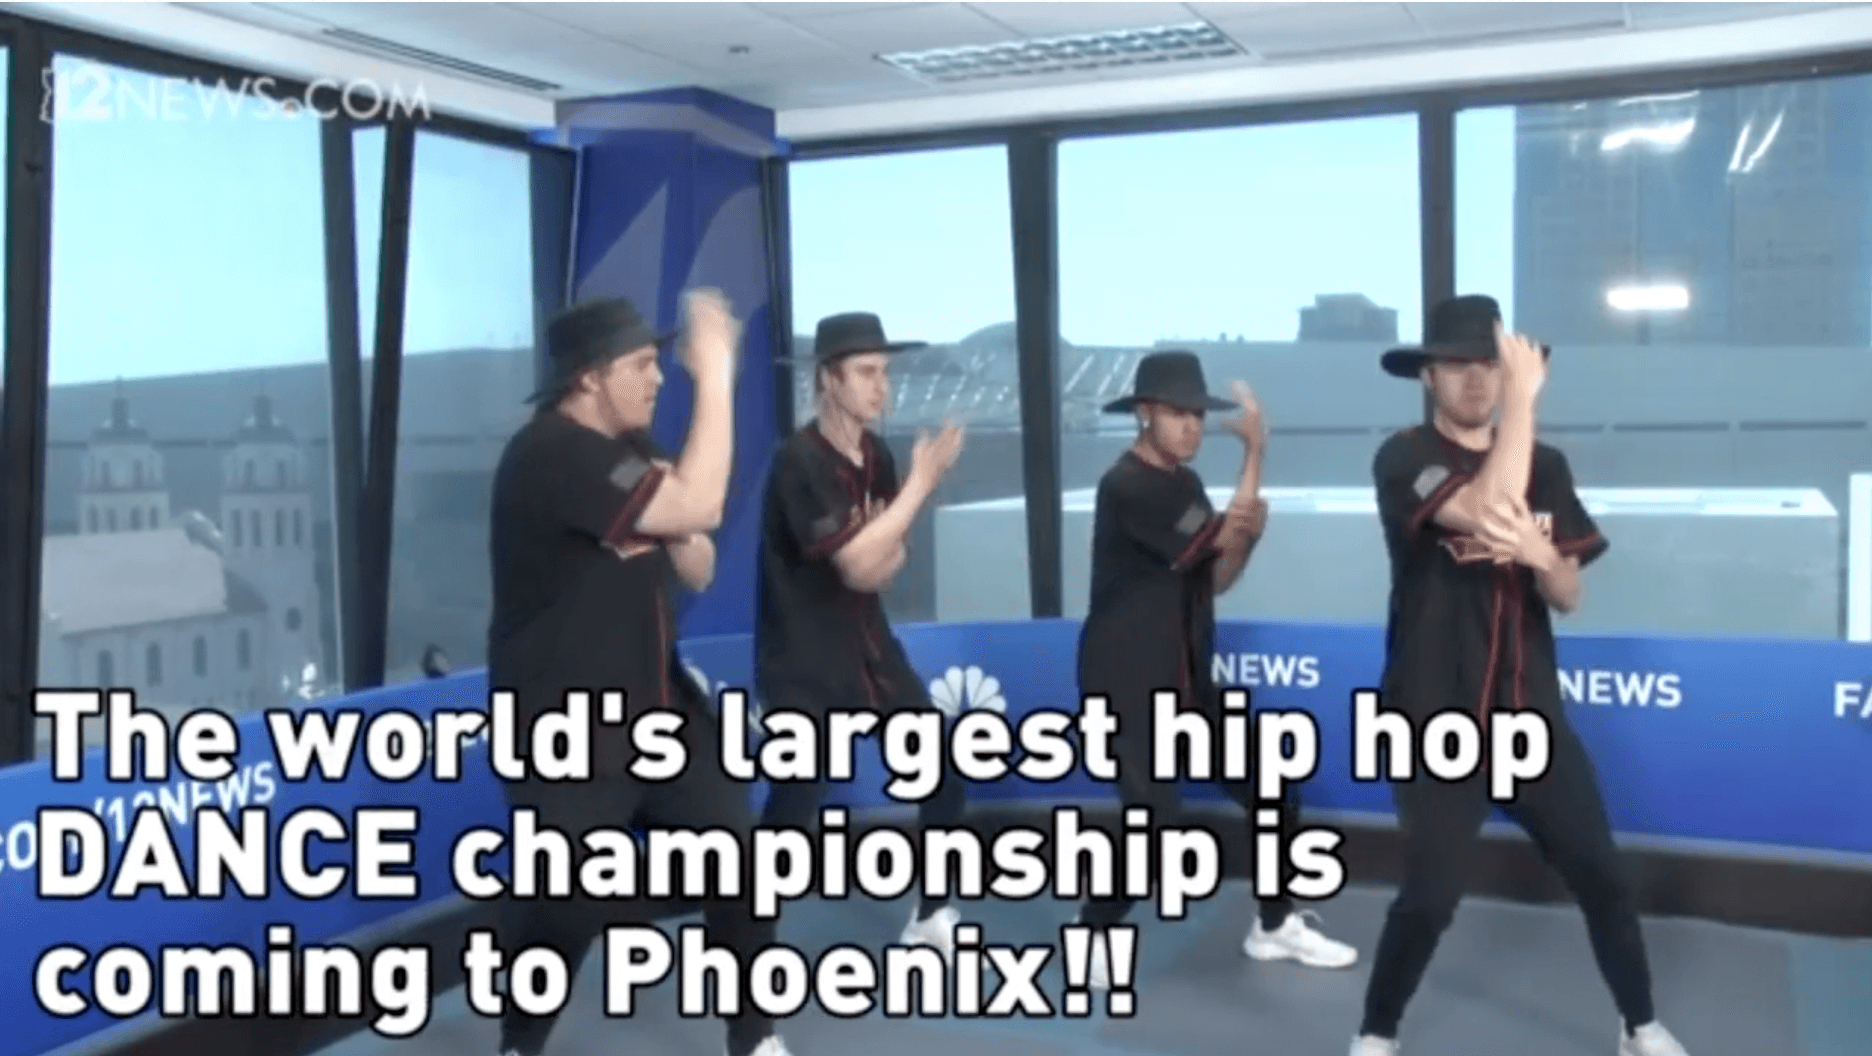 HHI: The world’s largest dance championship comes to Phoenix